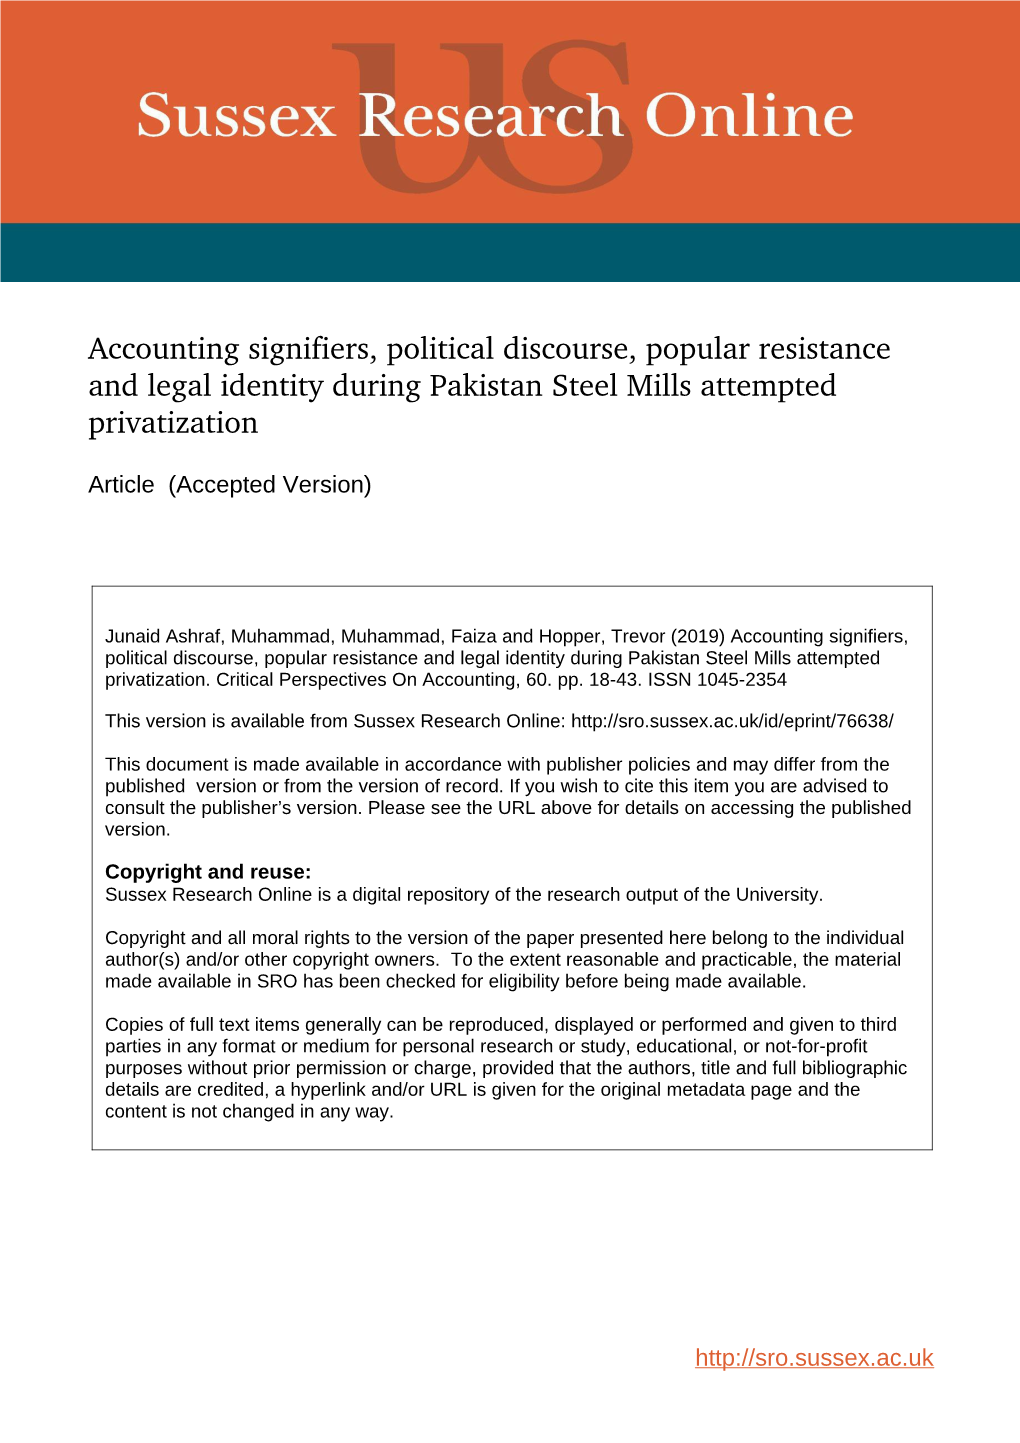 Accounting Signifiers, Political Discourse, Popular Resistance and Legal Identity During Pakistan Steel Mills Attempted Privatization